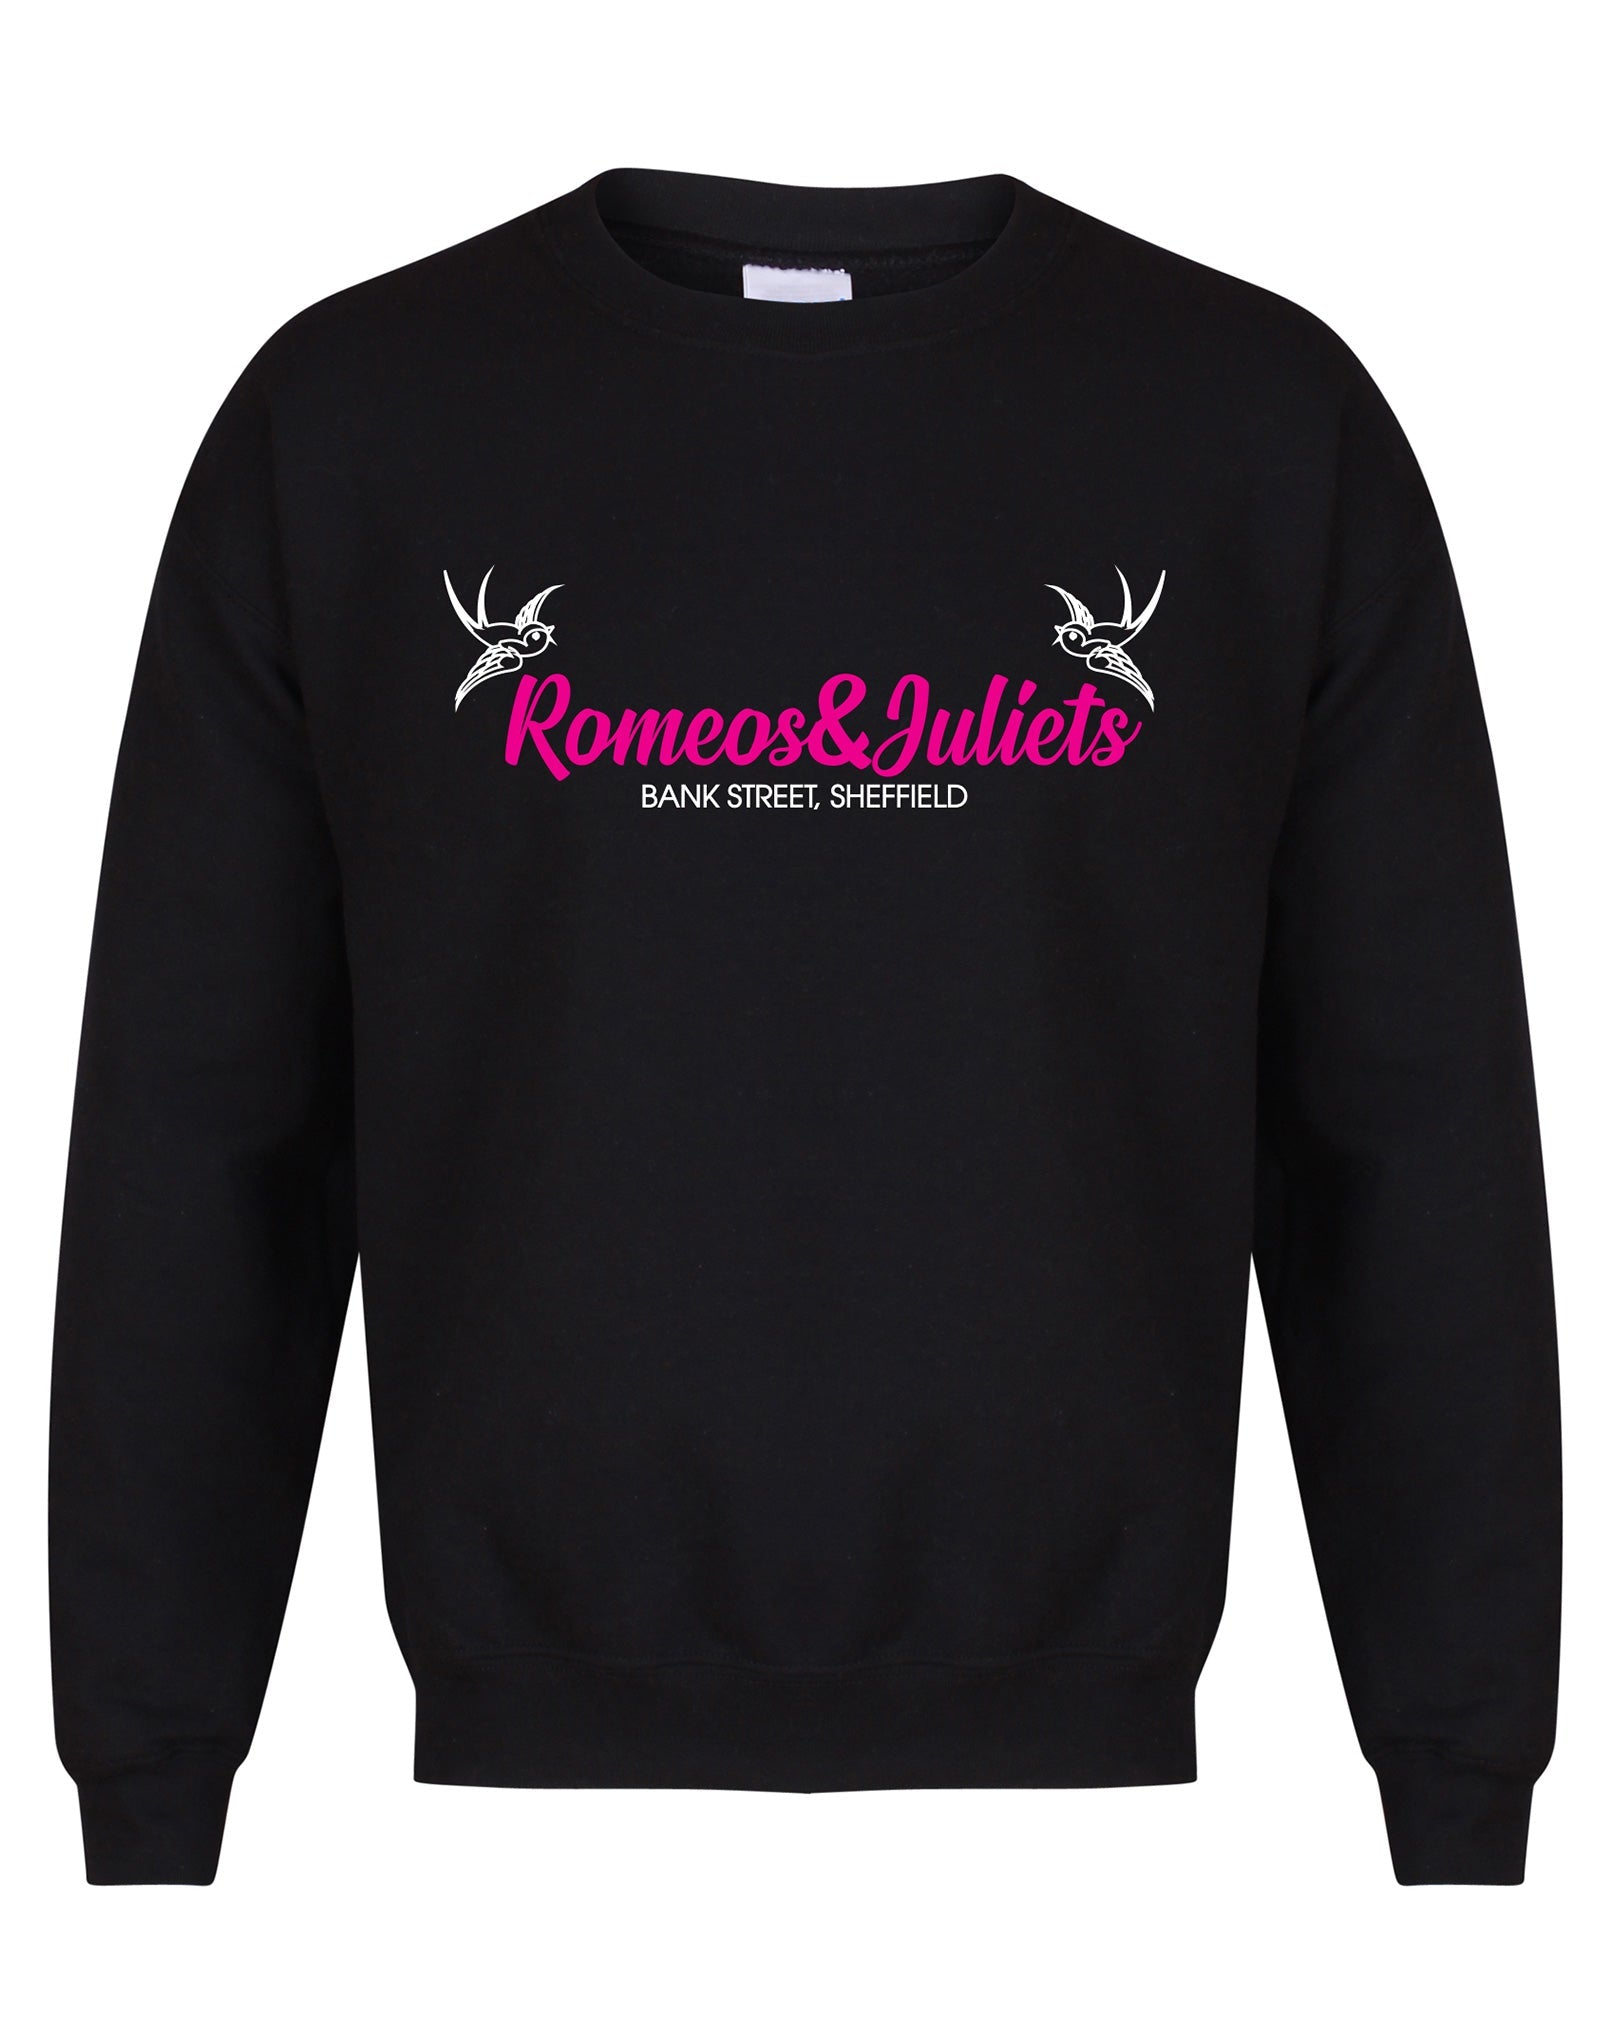 Romeos & Juliets unisex fit sweatshirt - various colours - Dirty Stop Outs